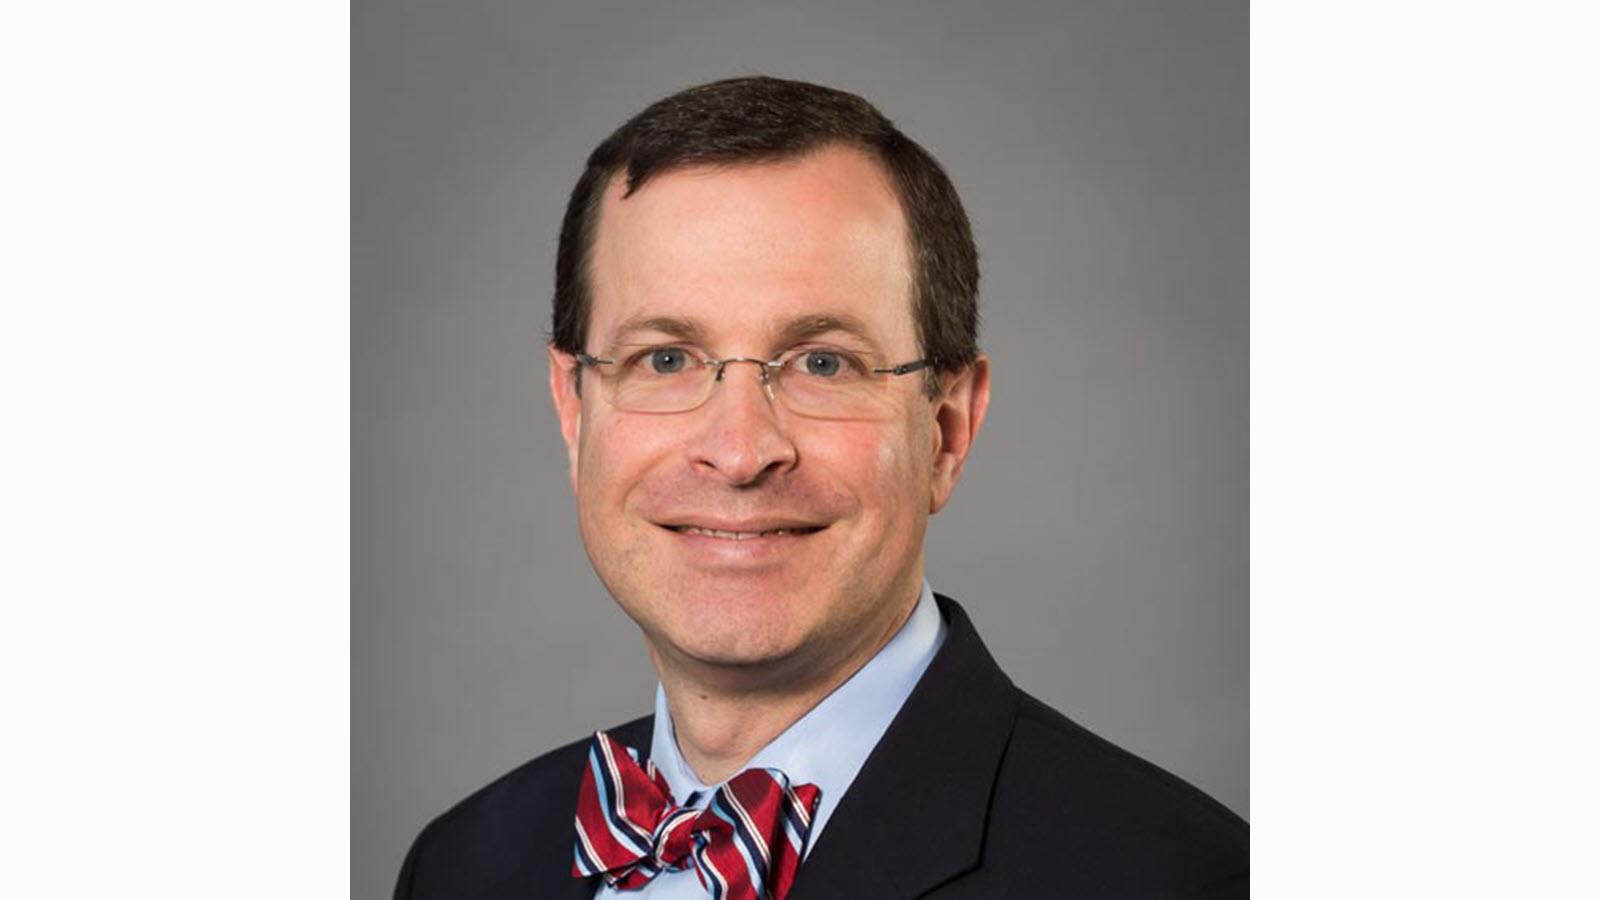 Andrew Koenig, D.O., F.A.C.R., CSL Behring Global Therapy Area Lead, Global Medical Affairs, Immunology